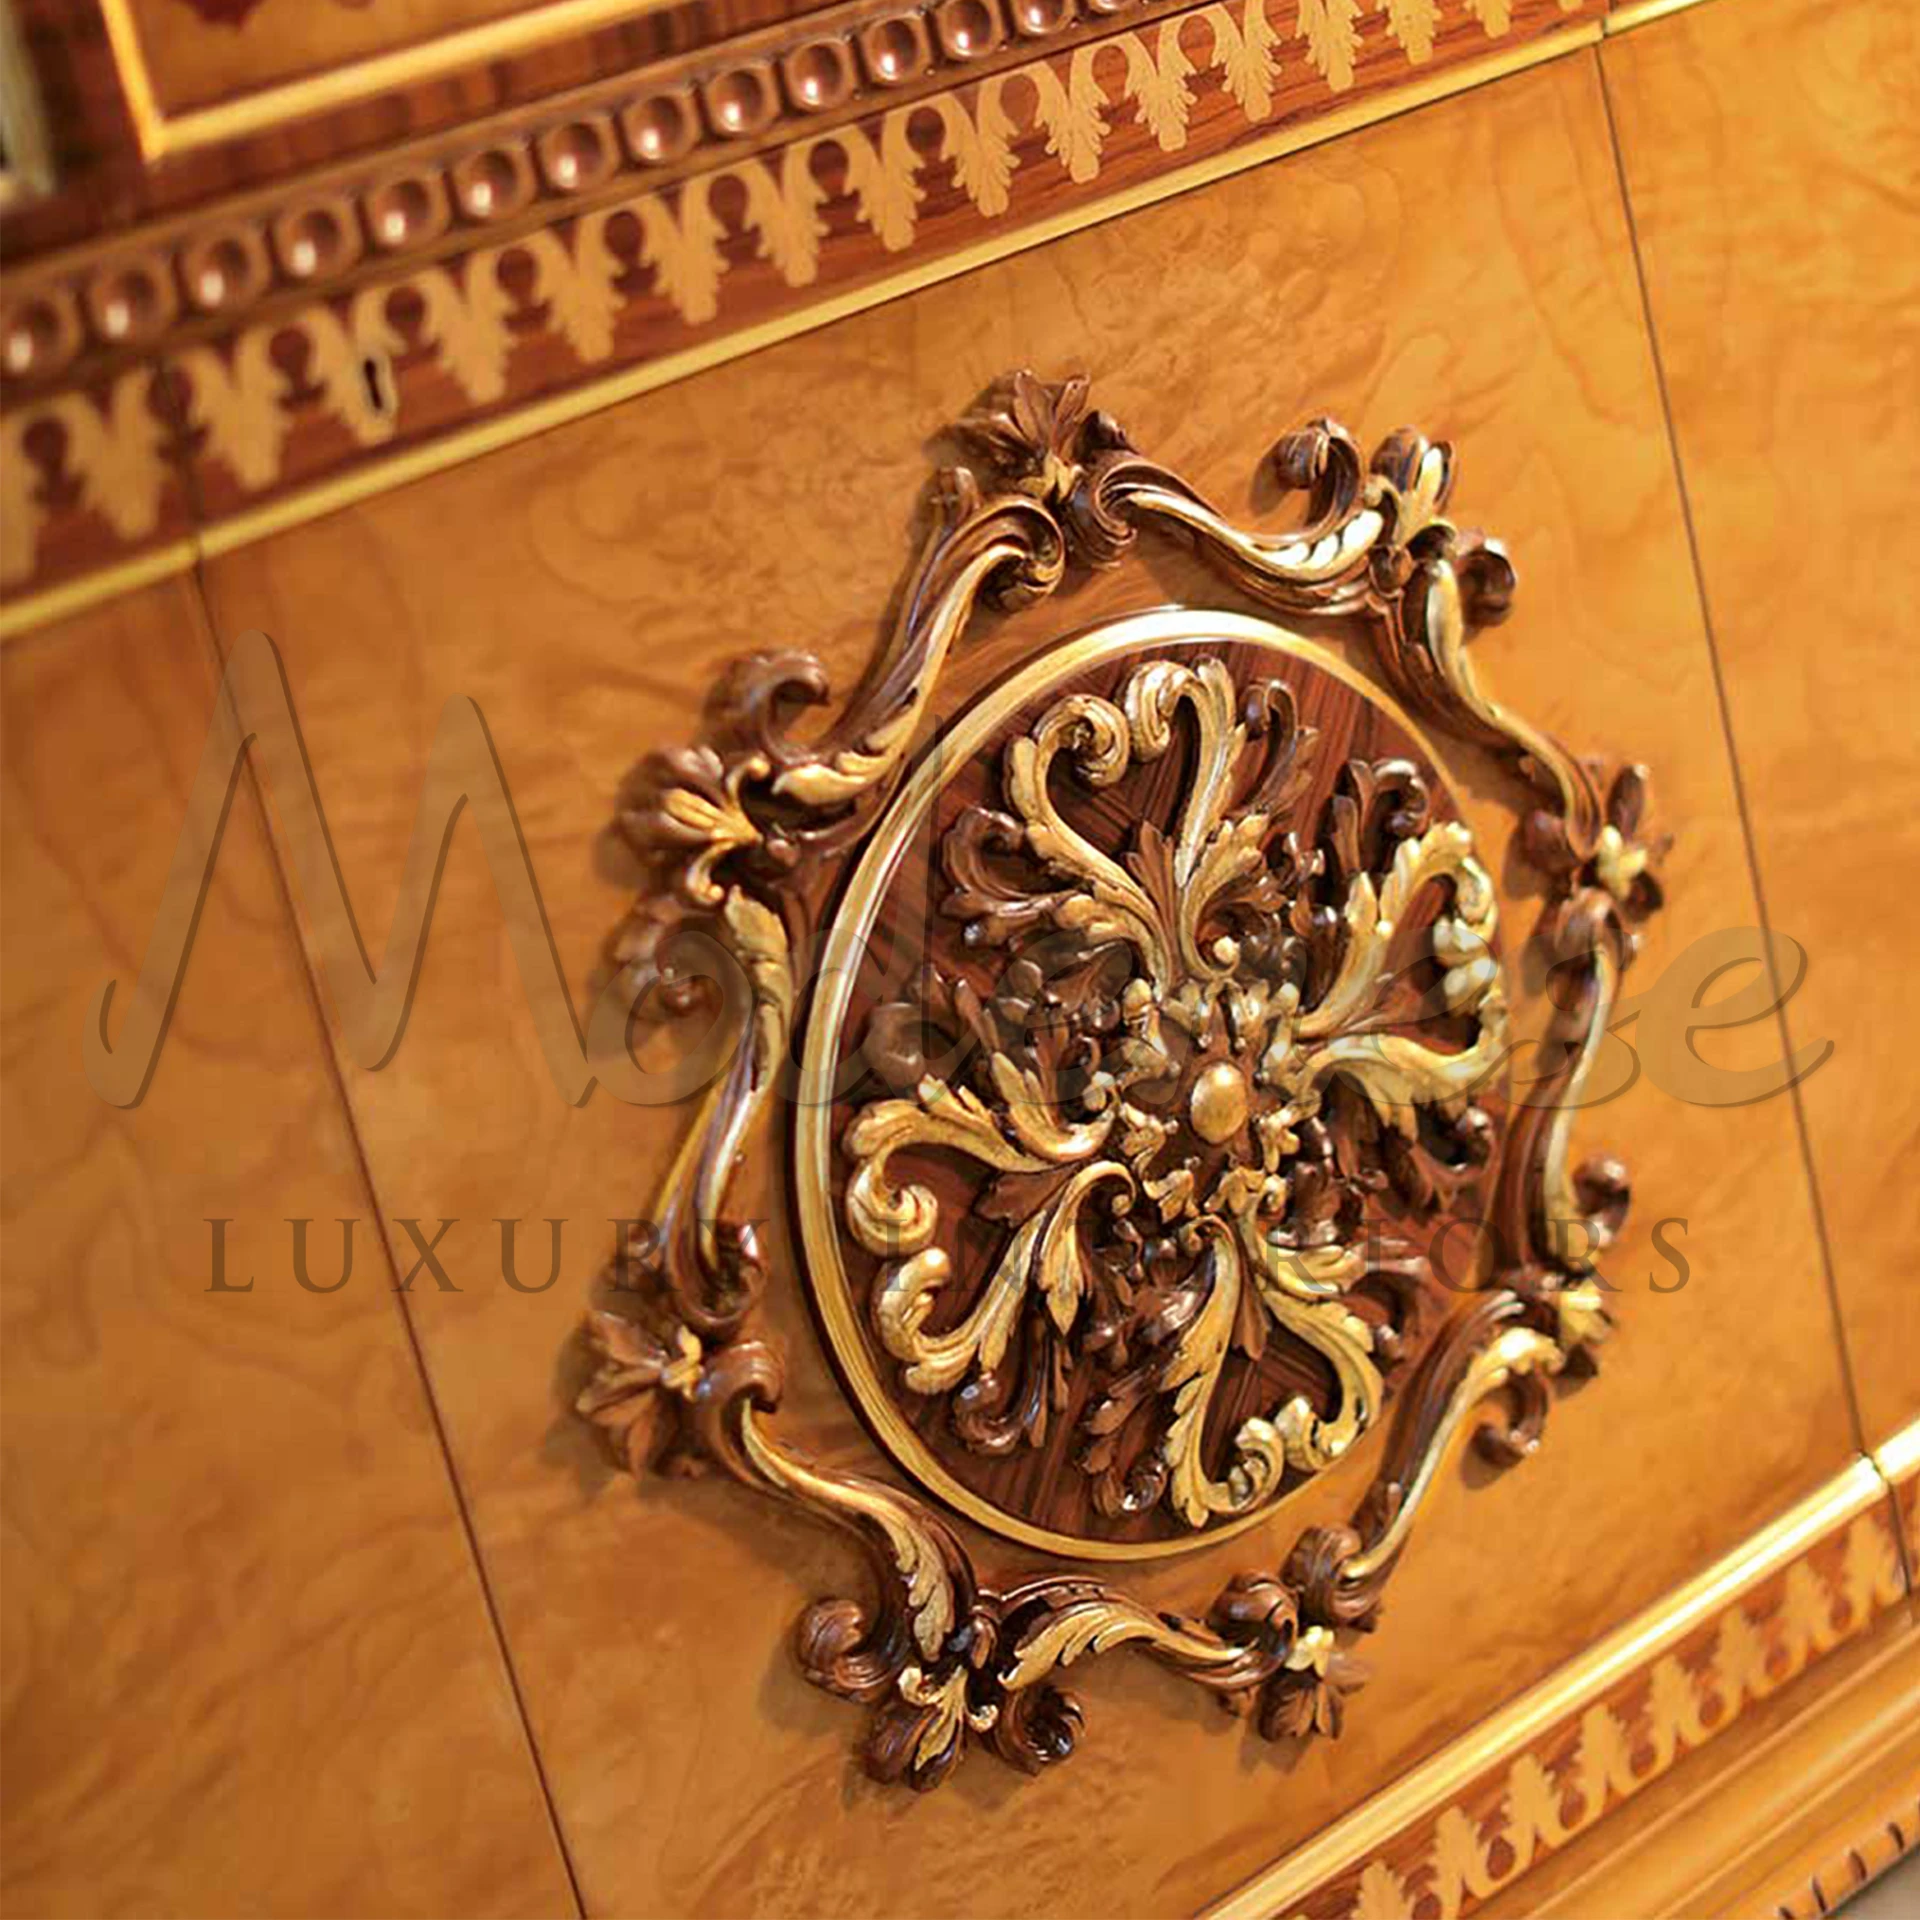 Timeless elegance meets practicality with this solid wood sideboard. Featuring intricate inlay and exquisite carvings, it's ideal for any hallway or living room.